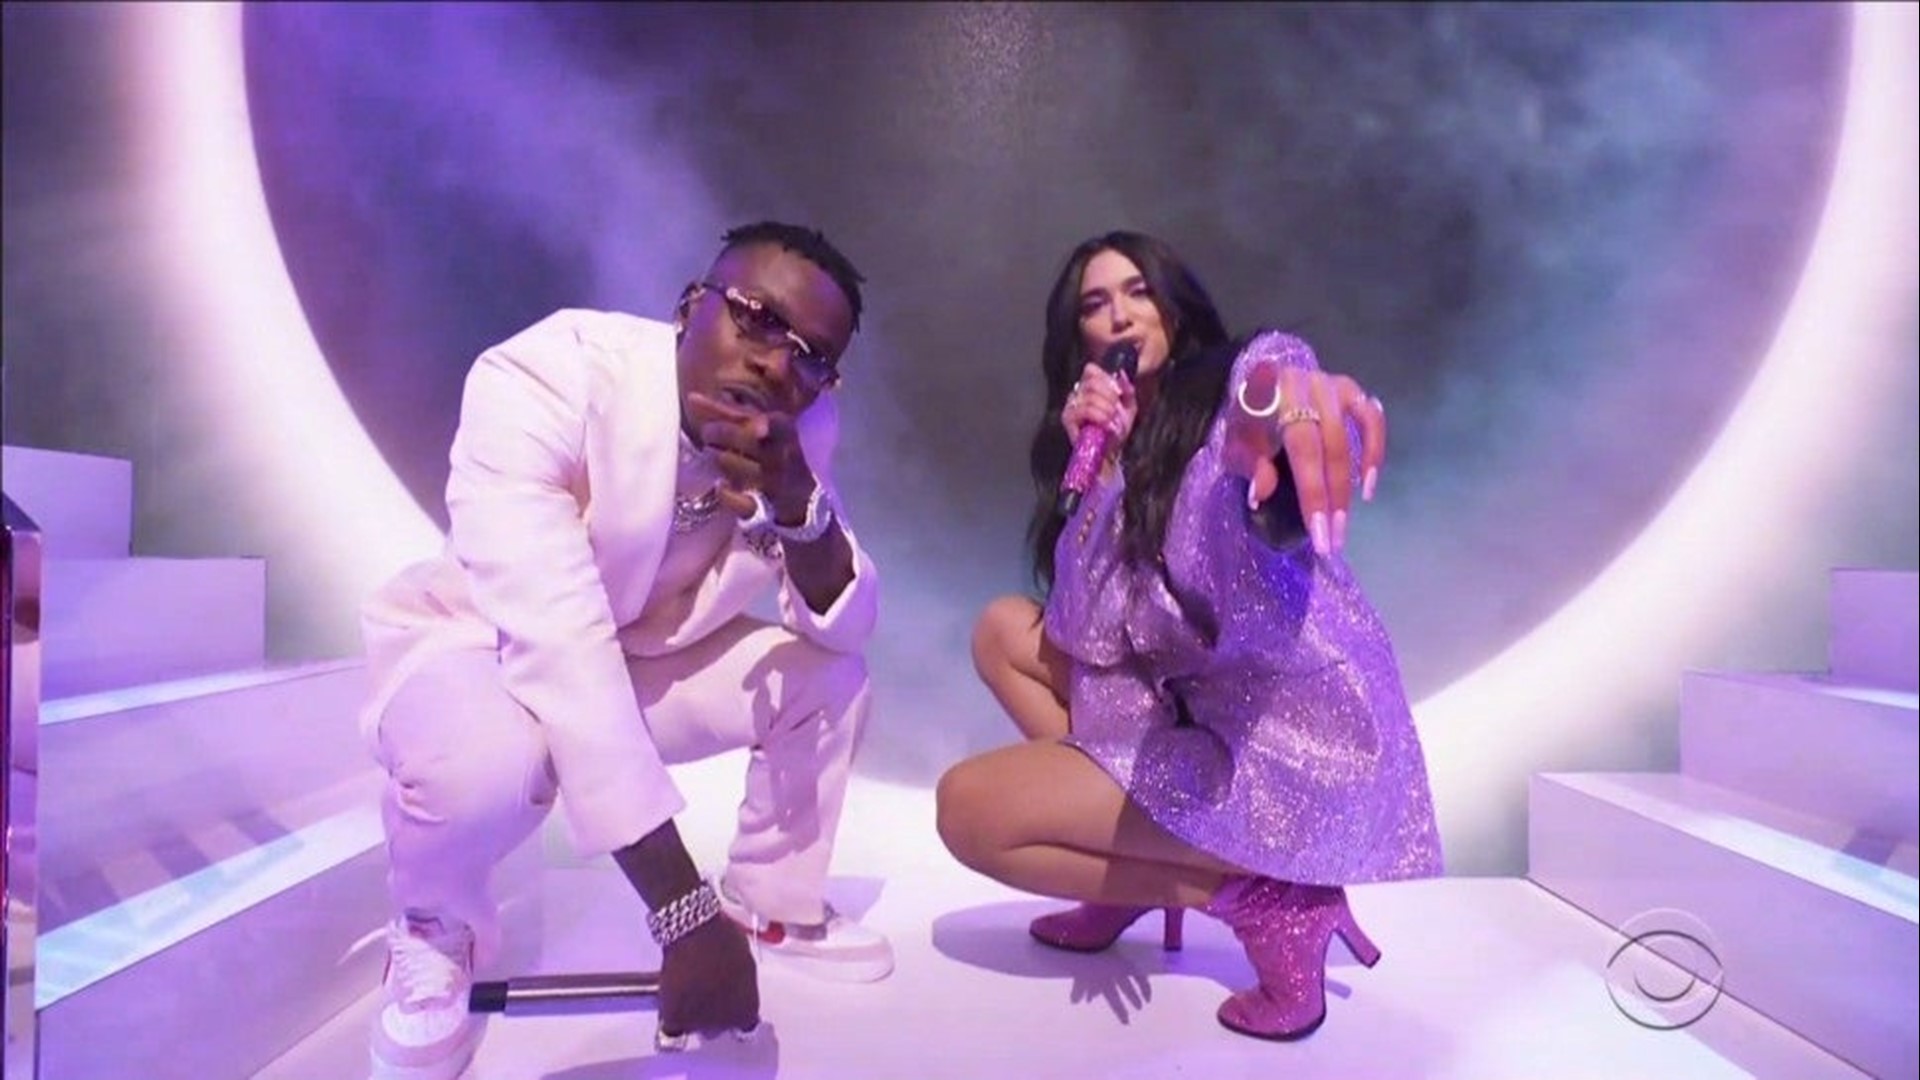 Dua Lipa Sparkles With 'Levitating' Performance Featuring DaBaby at